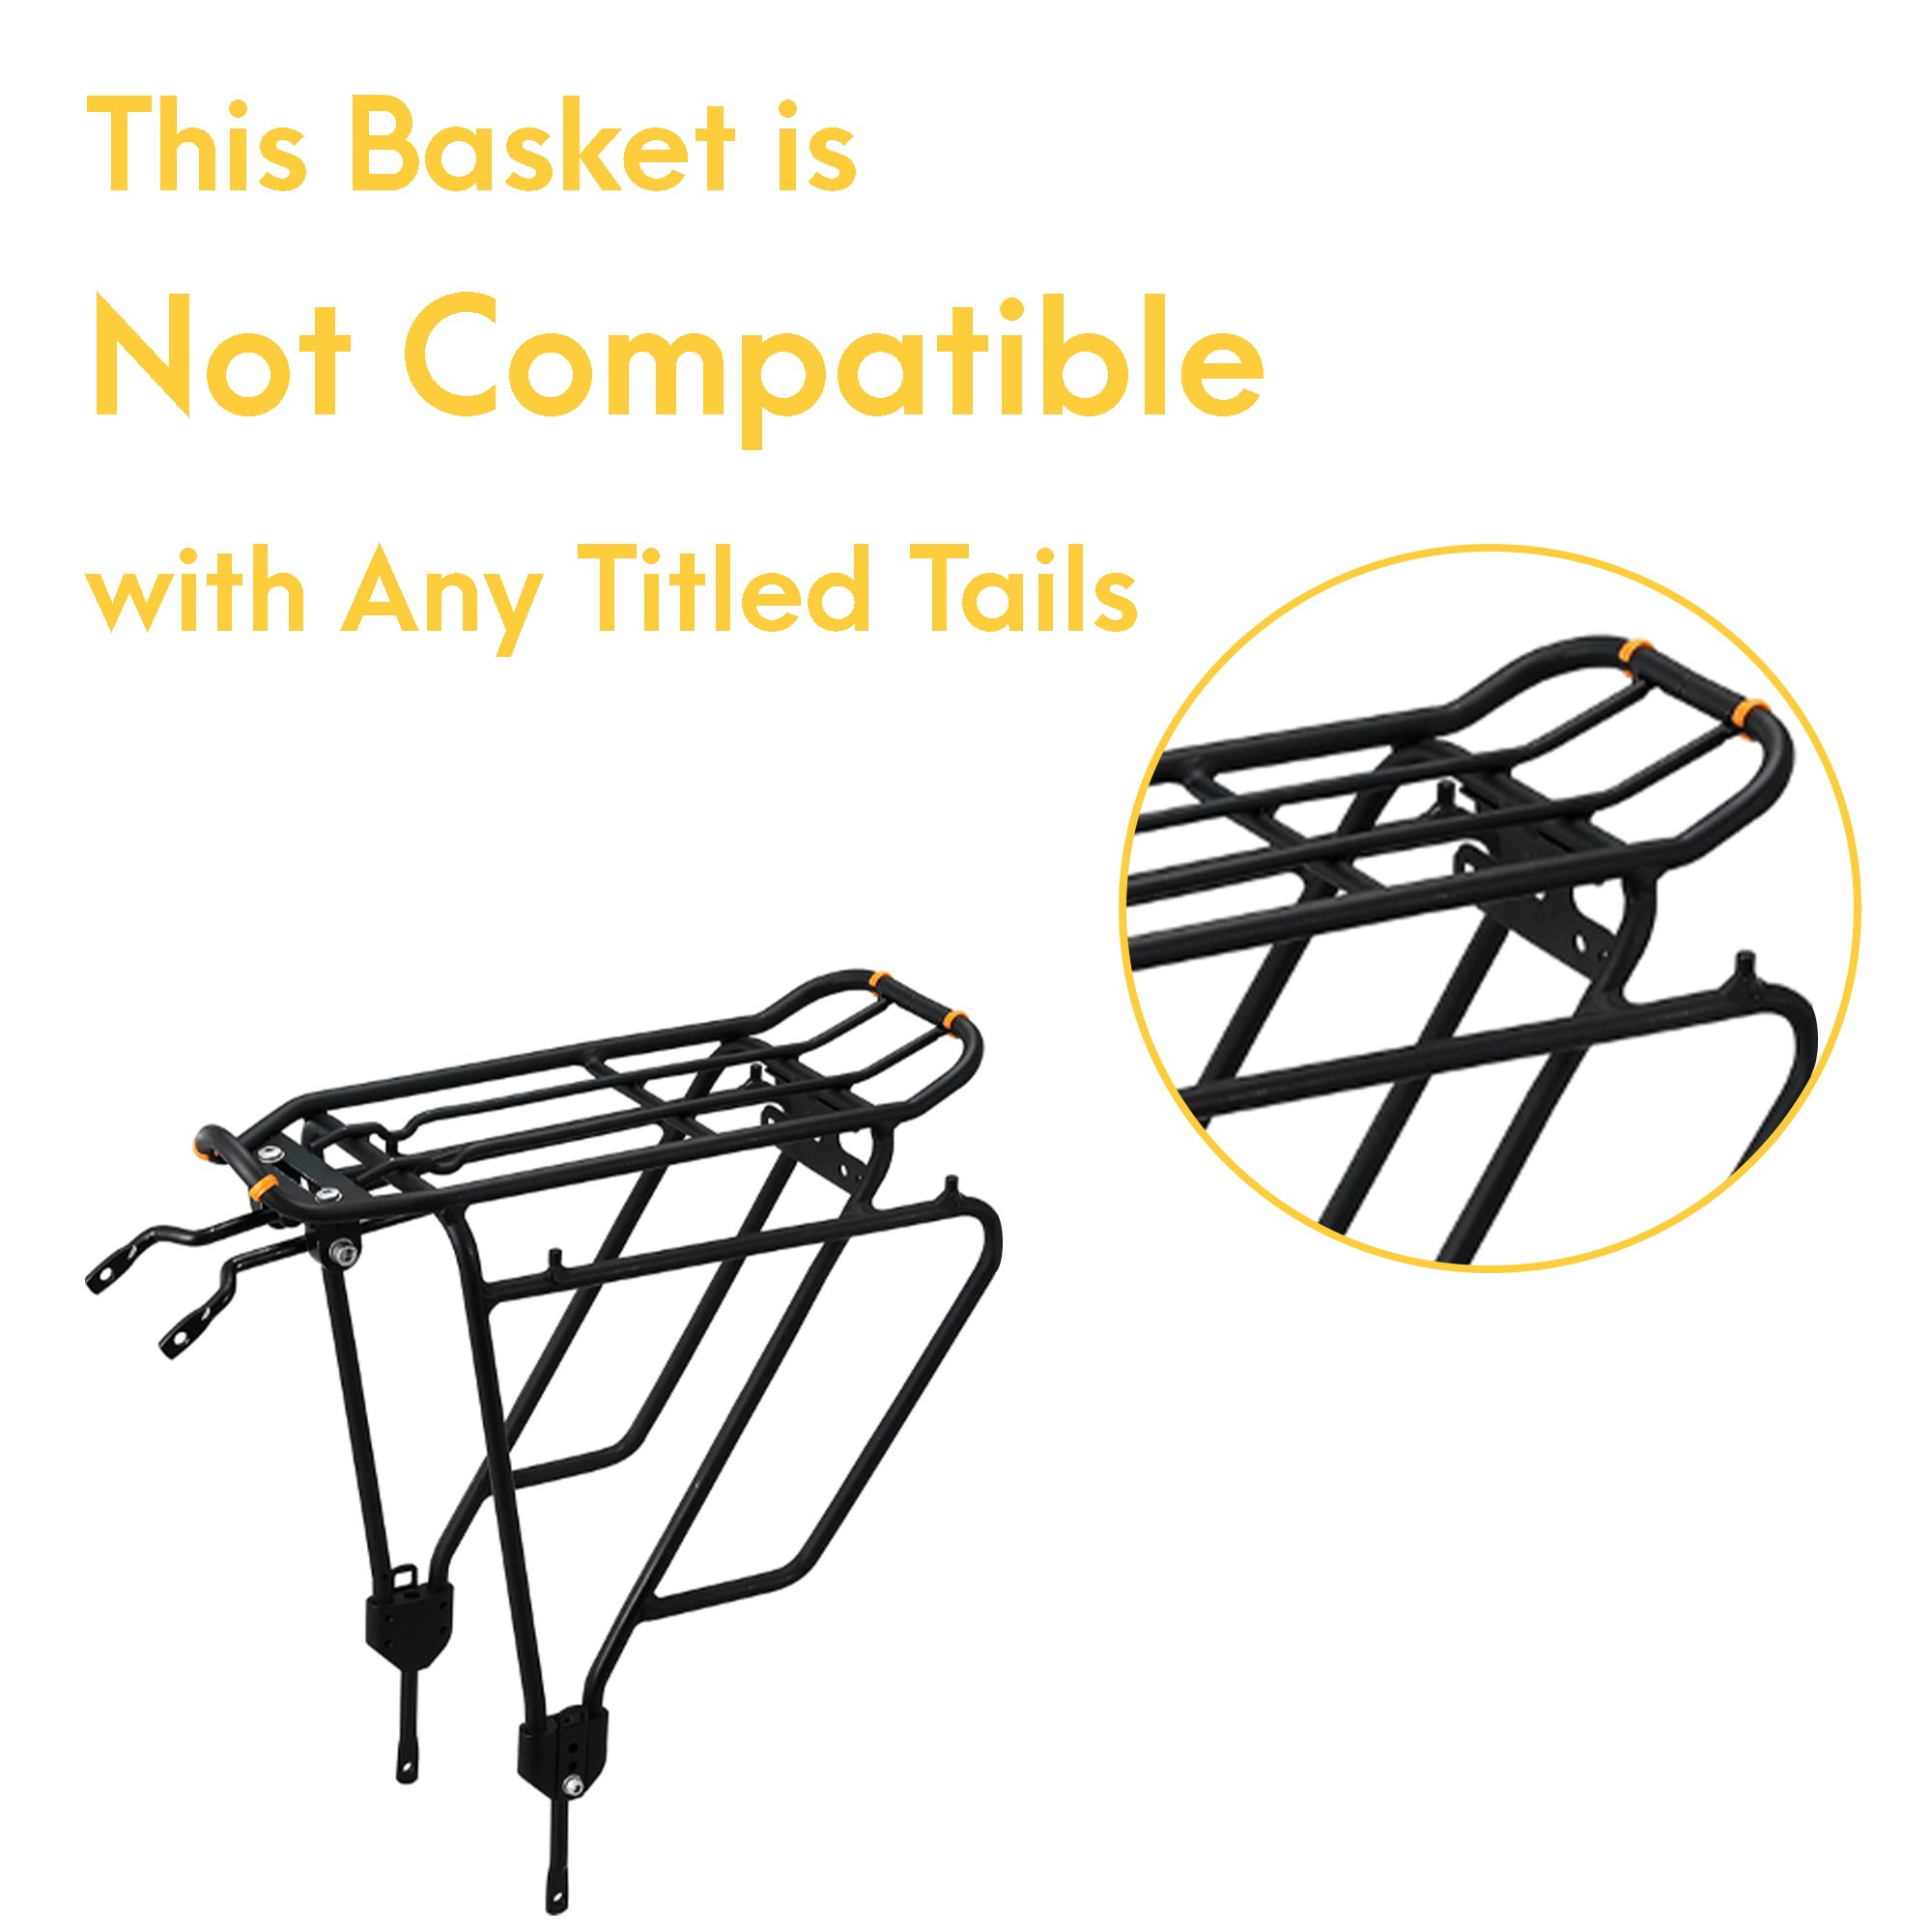 CyclingDeal Bike Bicycle Rear Mesh Basket Made of Quality Metal Wire with Rust Prevention Coating Compatible with Most Rear Pannier Racks 